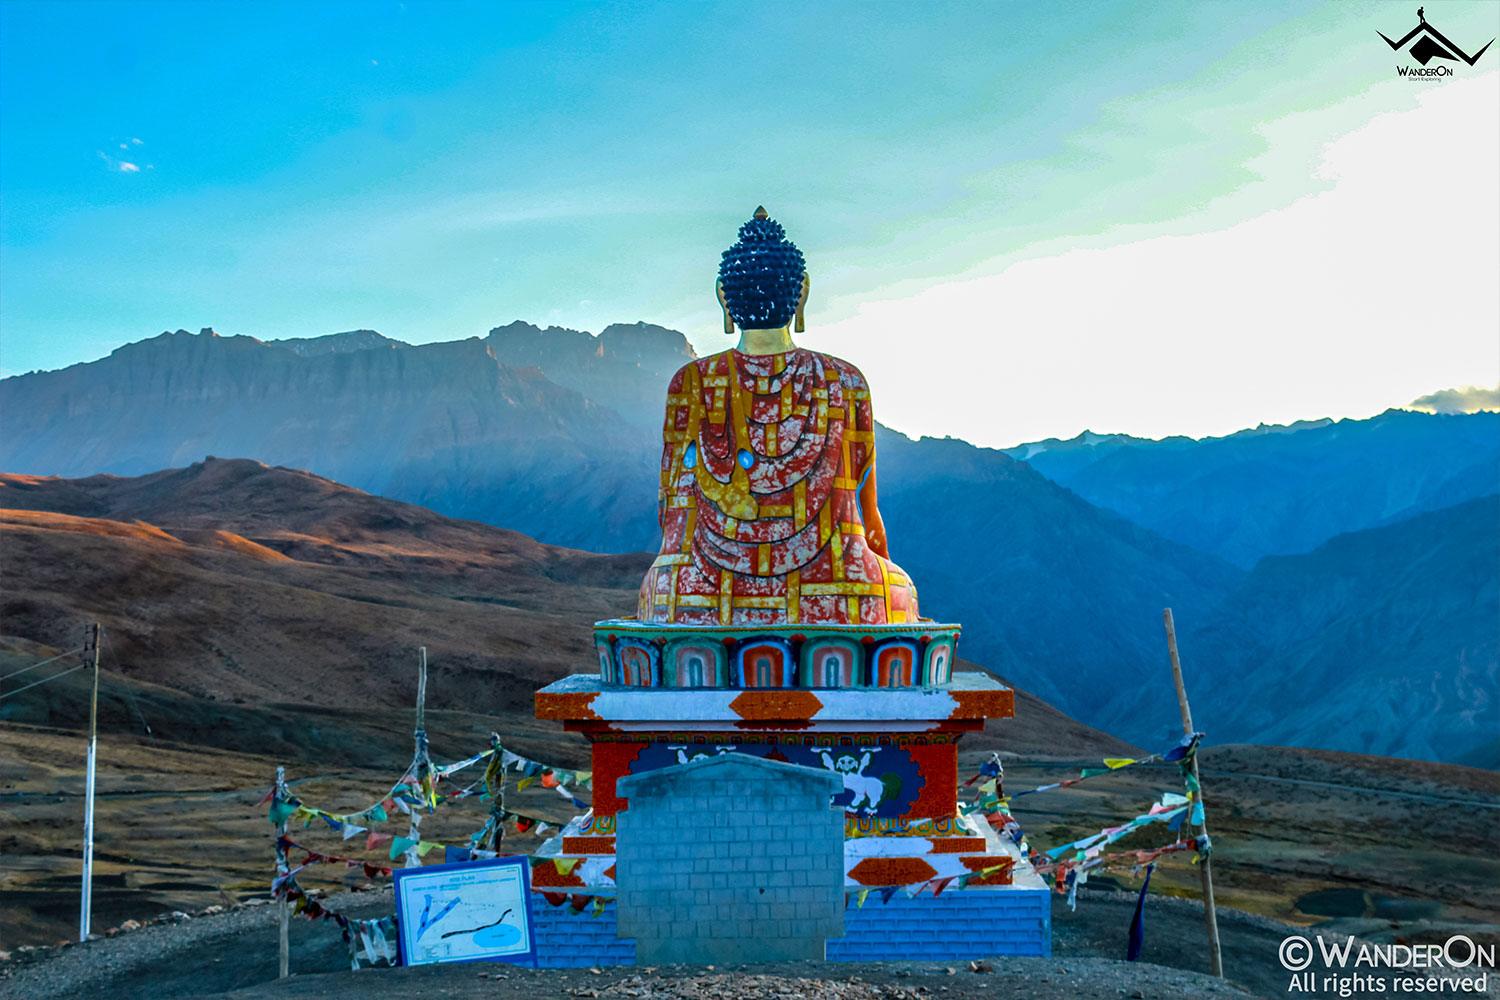 20 Things To Do In Spiti Valley For The Ultimate Experience